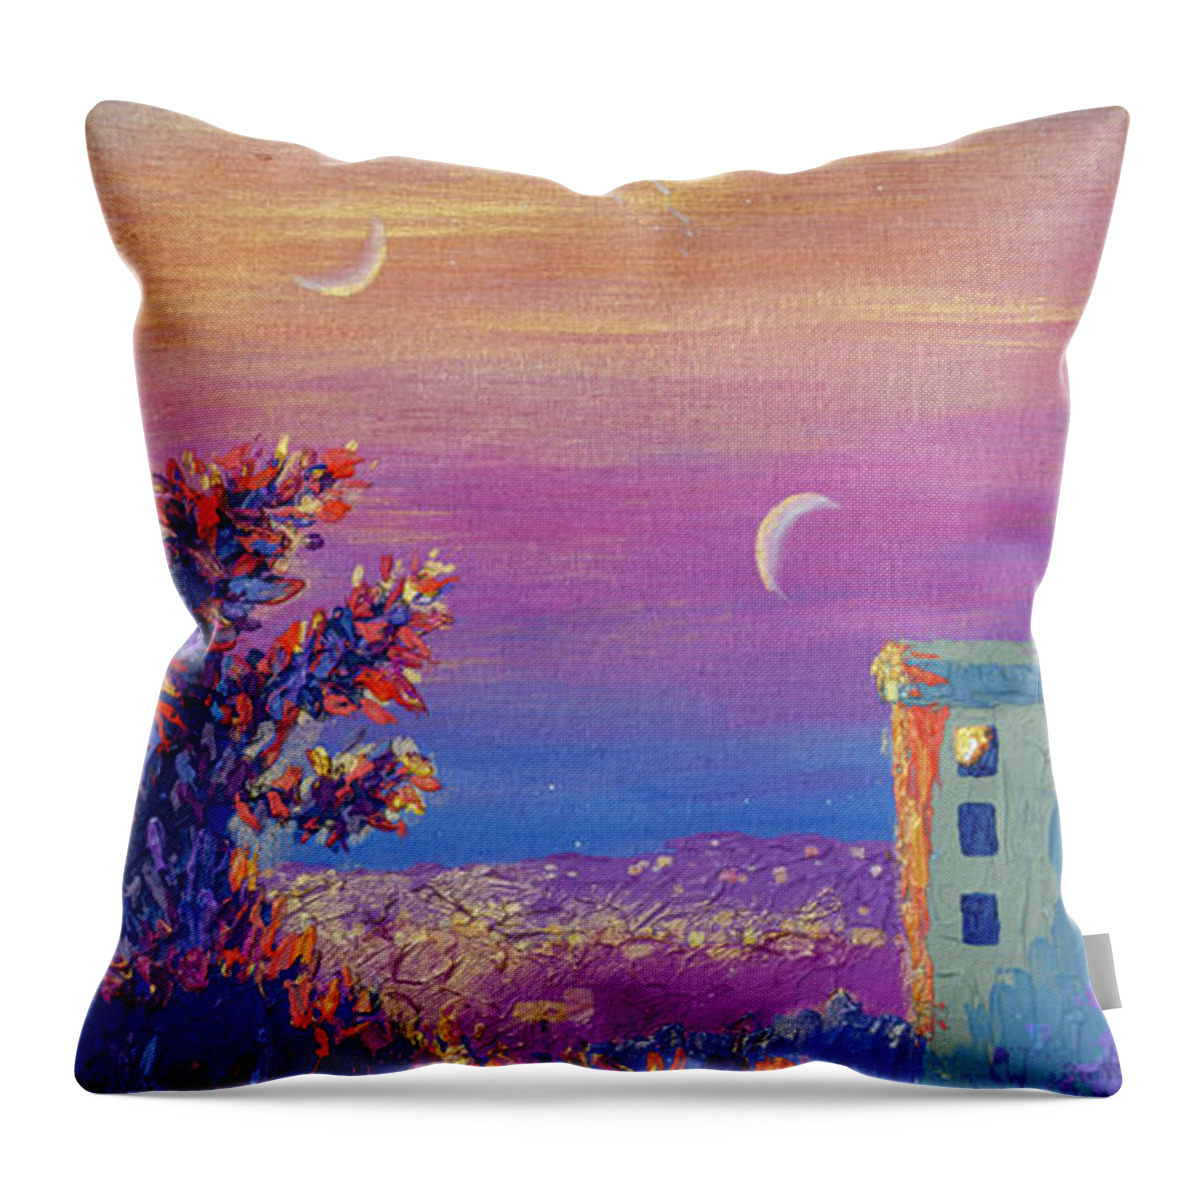 Landscape Throw Pillow featuring the painting Daniela's Sunrise by Ashley Wright